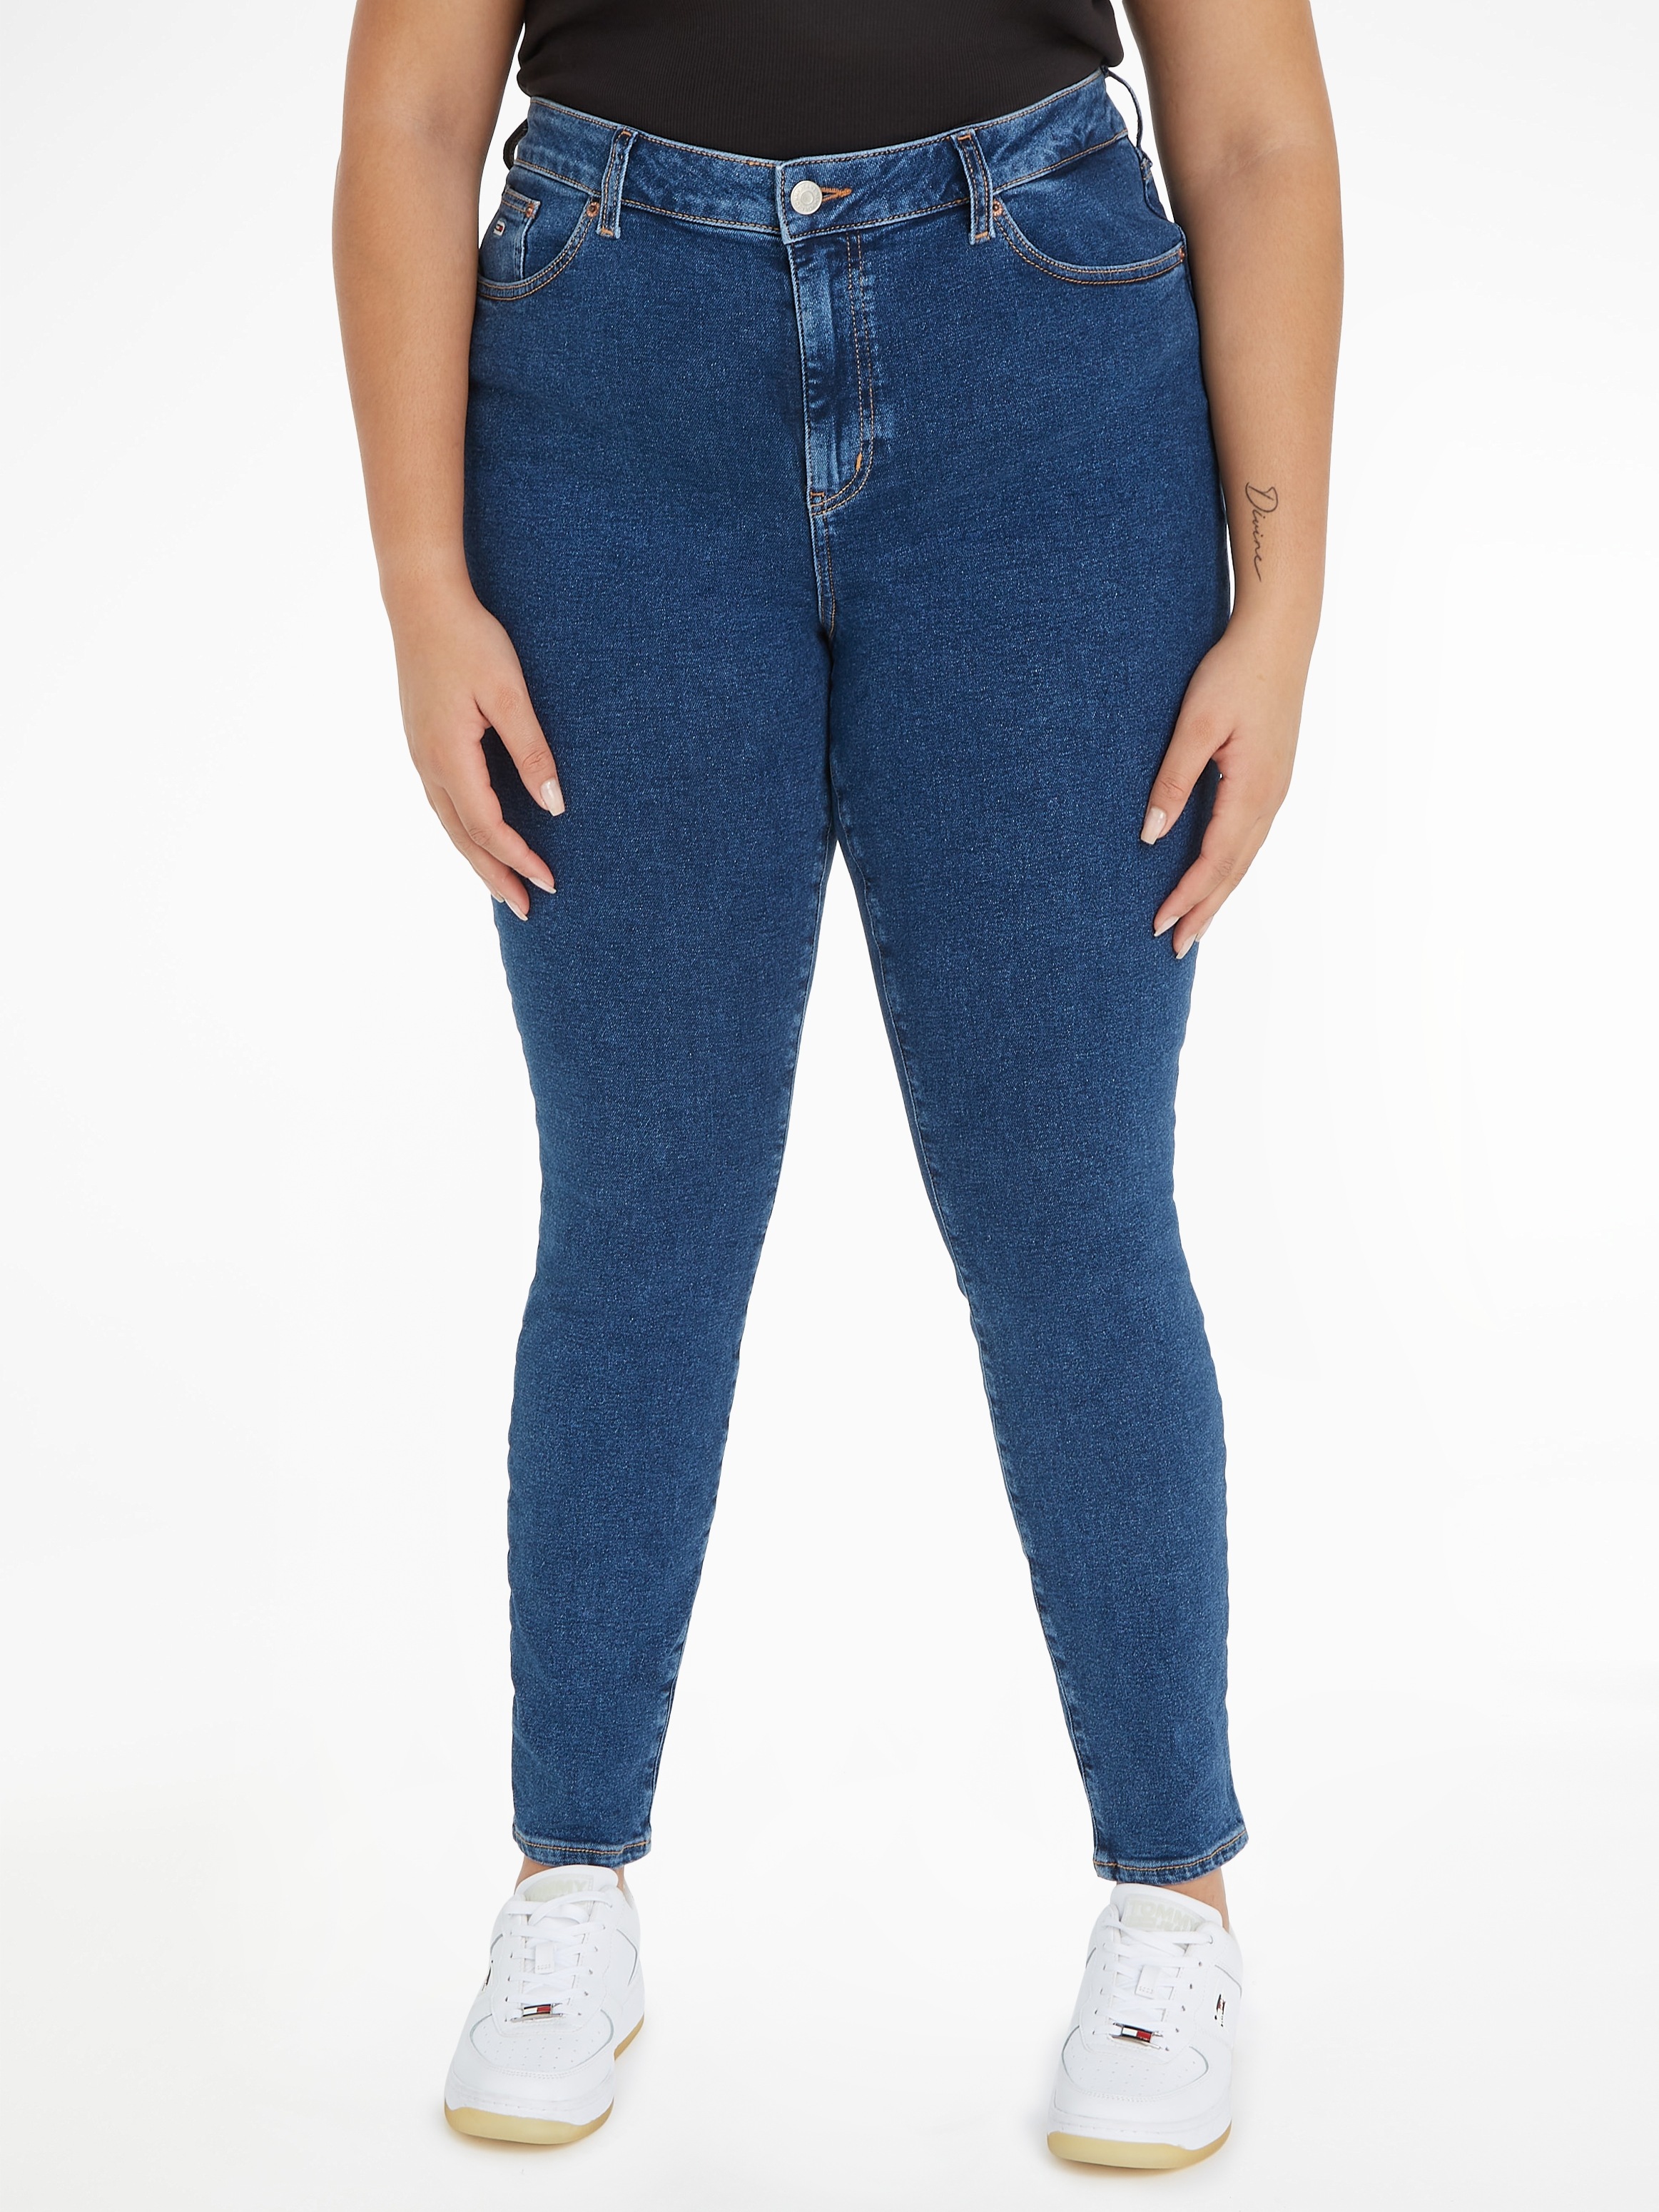 CURVE, angeboten wird in bei Weiten Jeans SIZE PLUS Tommy Jeans Curve Skinny-fit-Jeans, OTTOversand